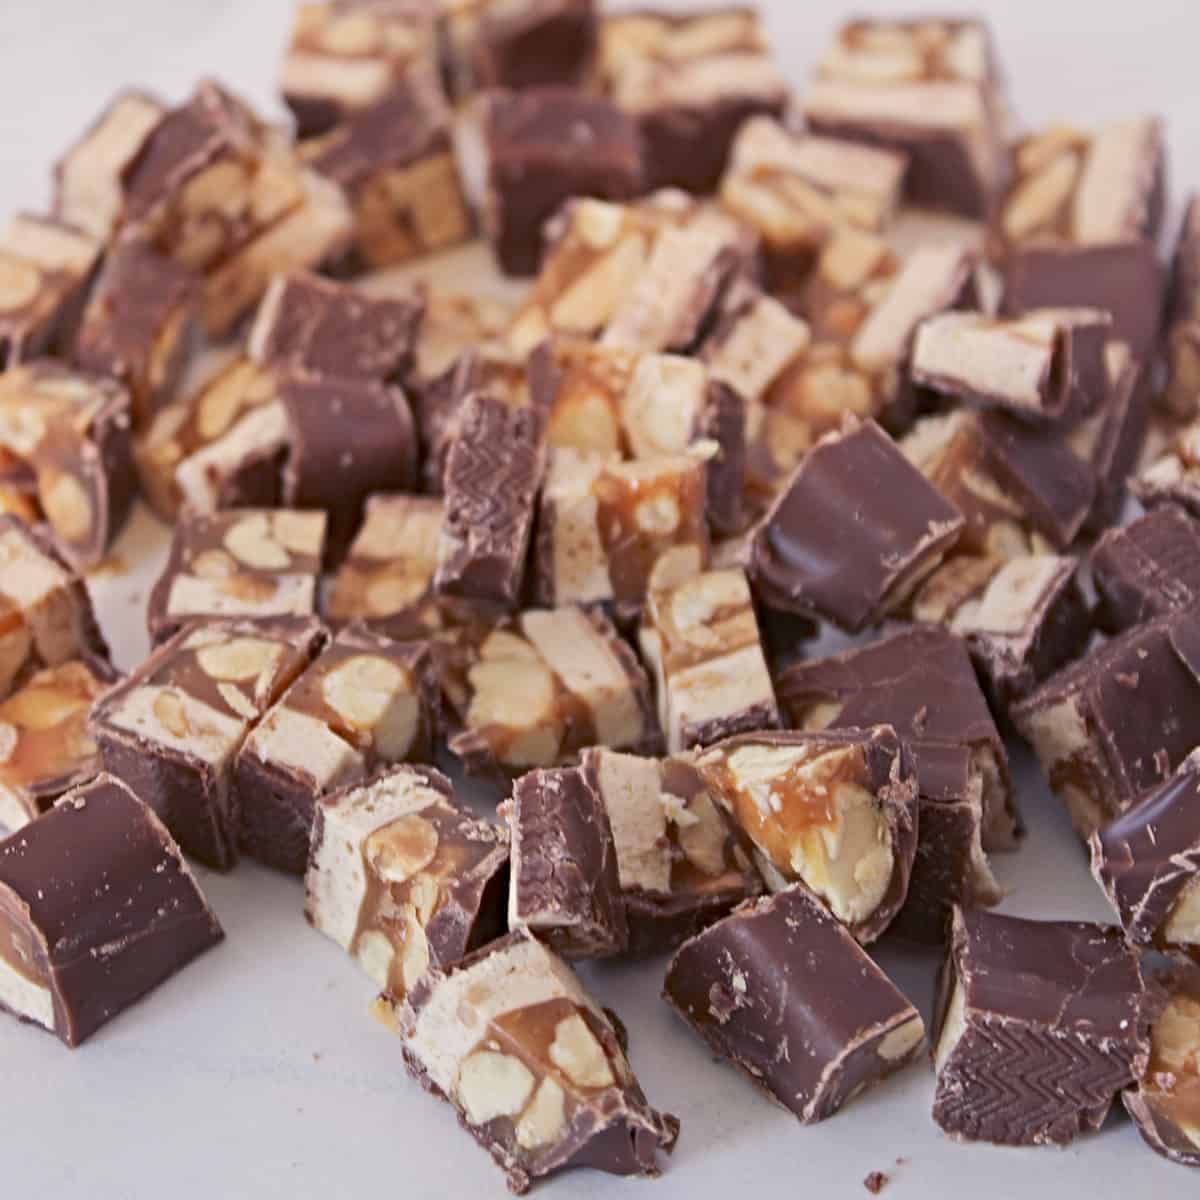 Snickers bars chopped into small pieces.